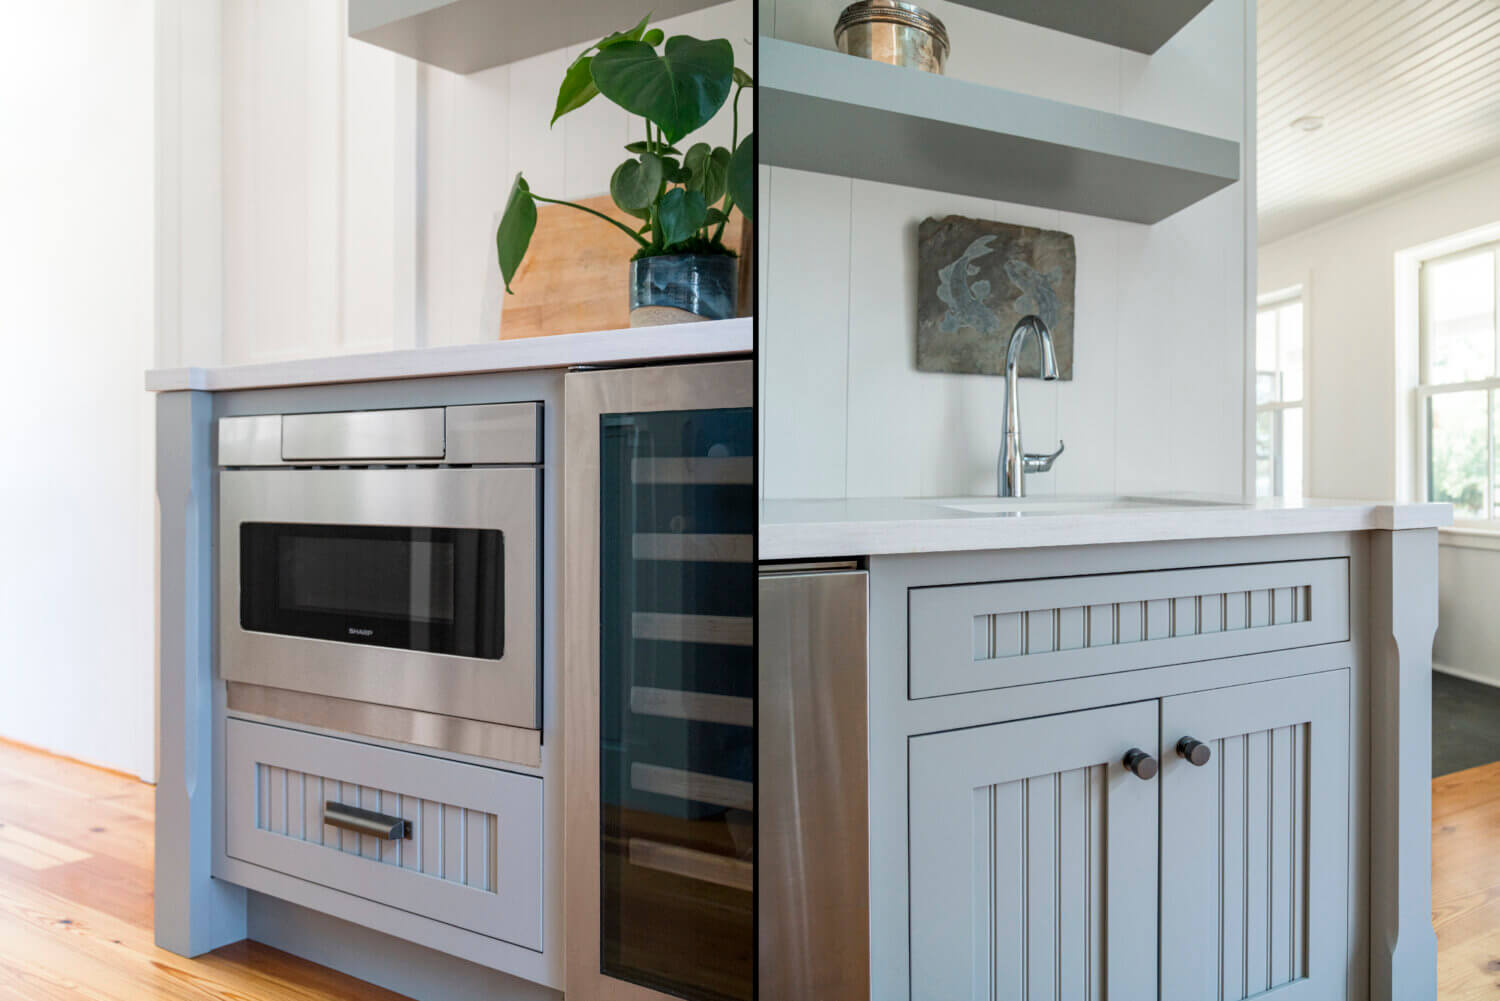 A beverage center on the left and a clean-up station on the right with gray painted cabinets with cottage beaded details on the cabinet doors.